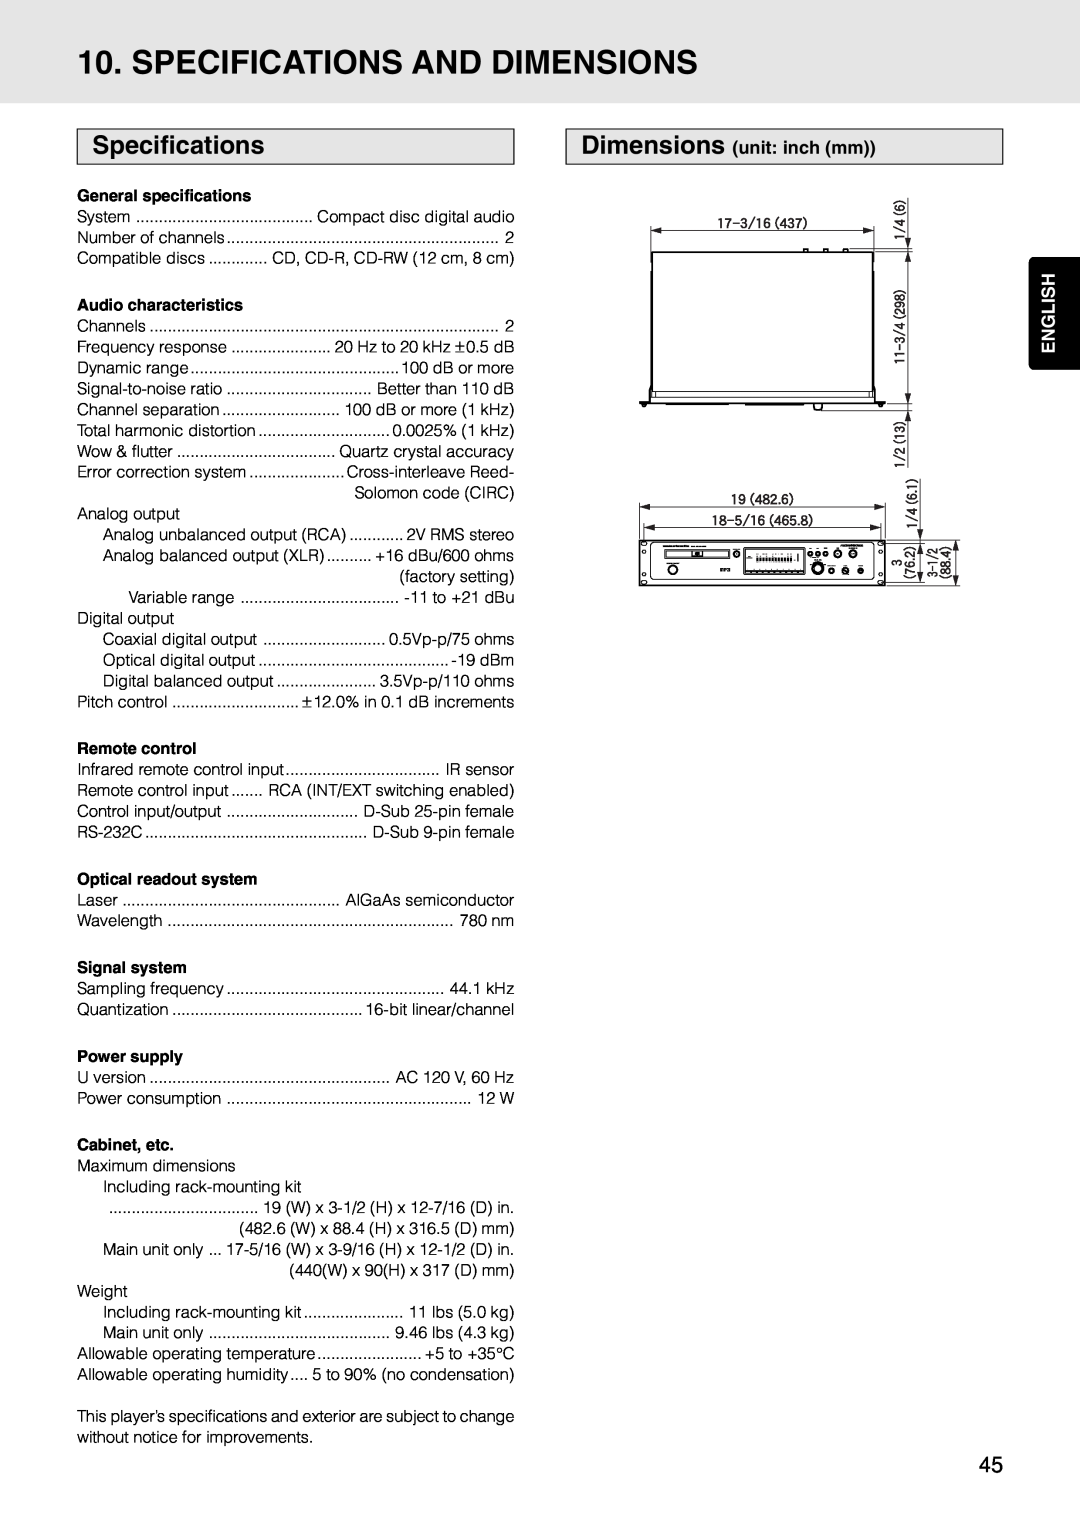 Marantz PMD325 Specifications And Dimensions, Dimensions unit: inch mm, English, General specifications, Remote control 